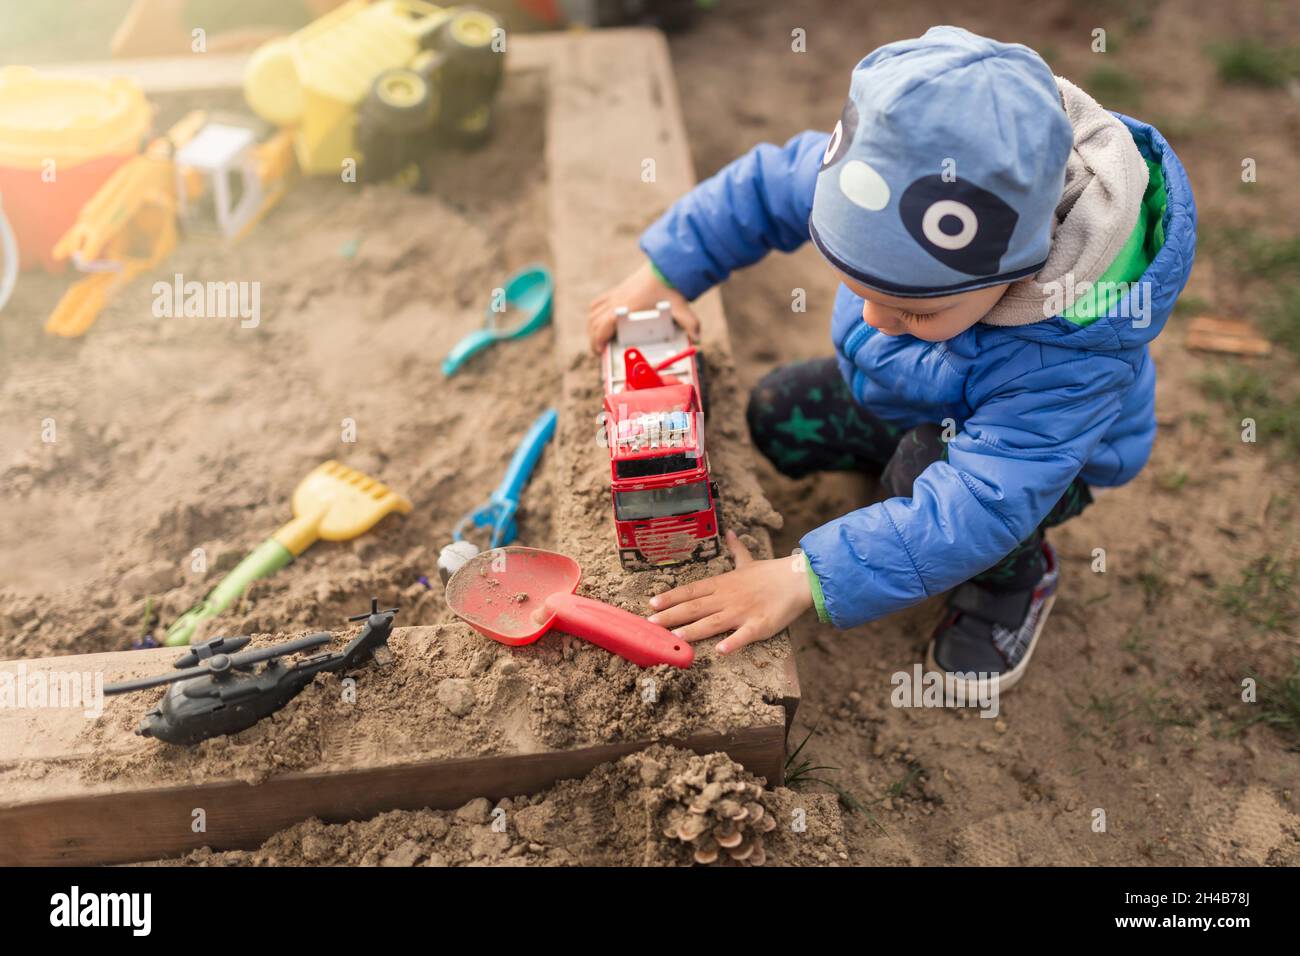 Small boy playing with toys in sandpit wearing blue clothes Stock Photo